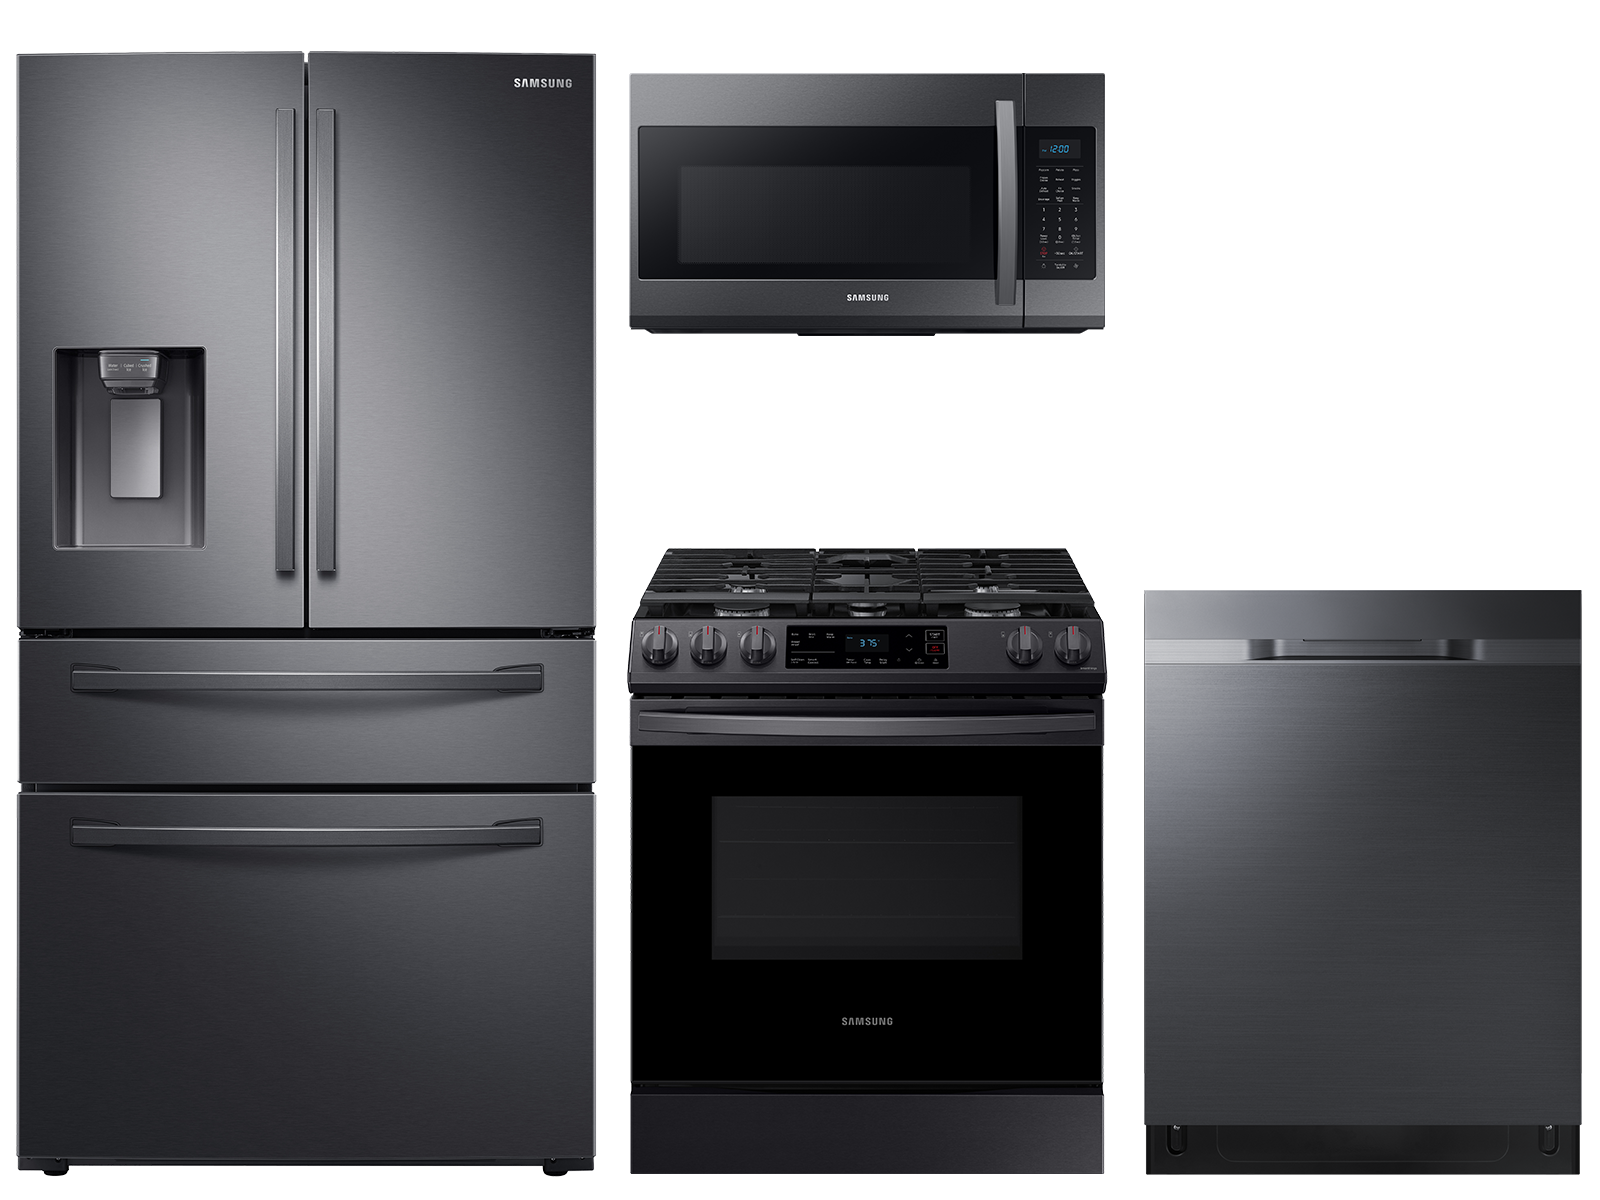 23 cu. ft. counter depth 4-door refrigerator, gas range, 2.1 cu. ft. microwave and 48 dBA dishwasher package